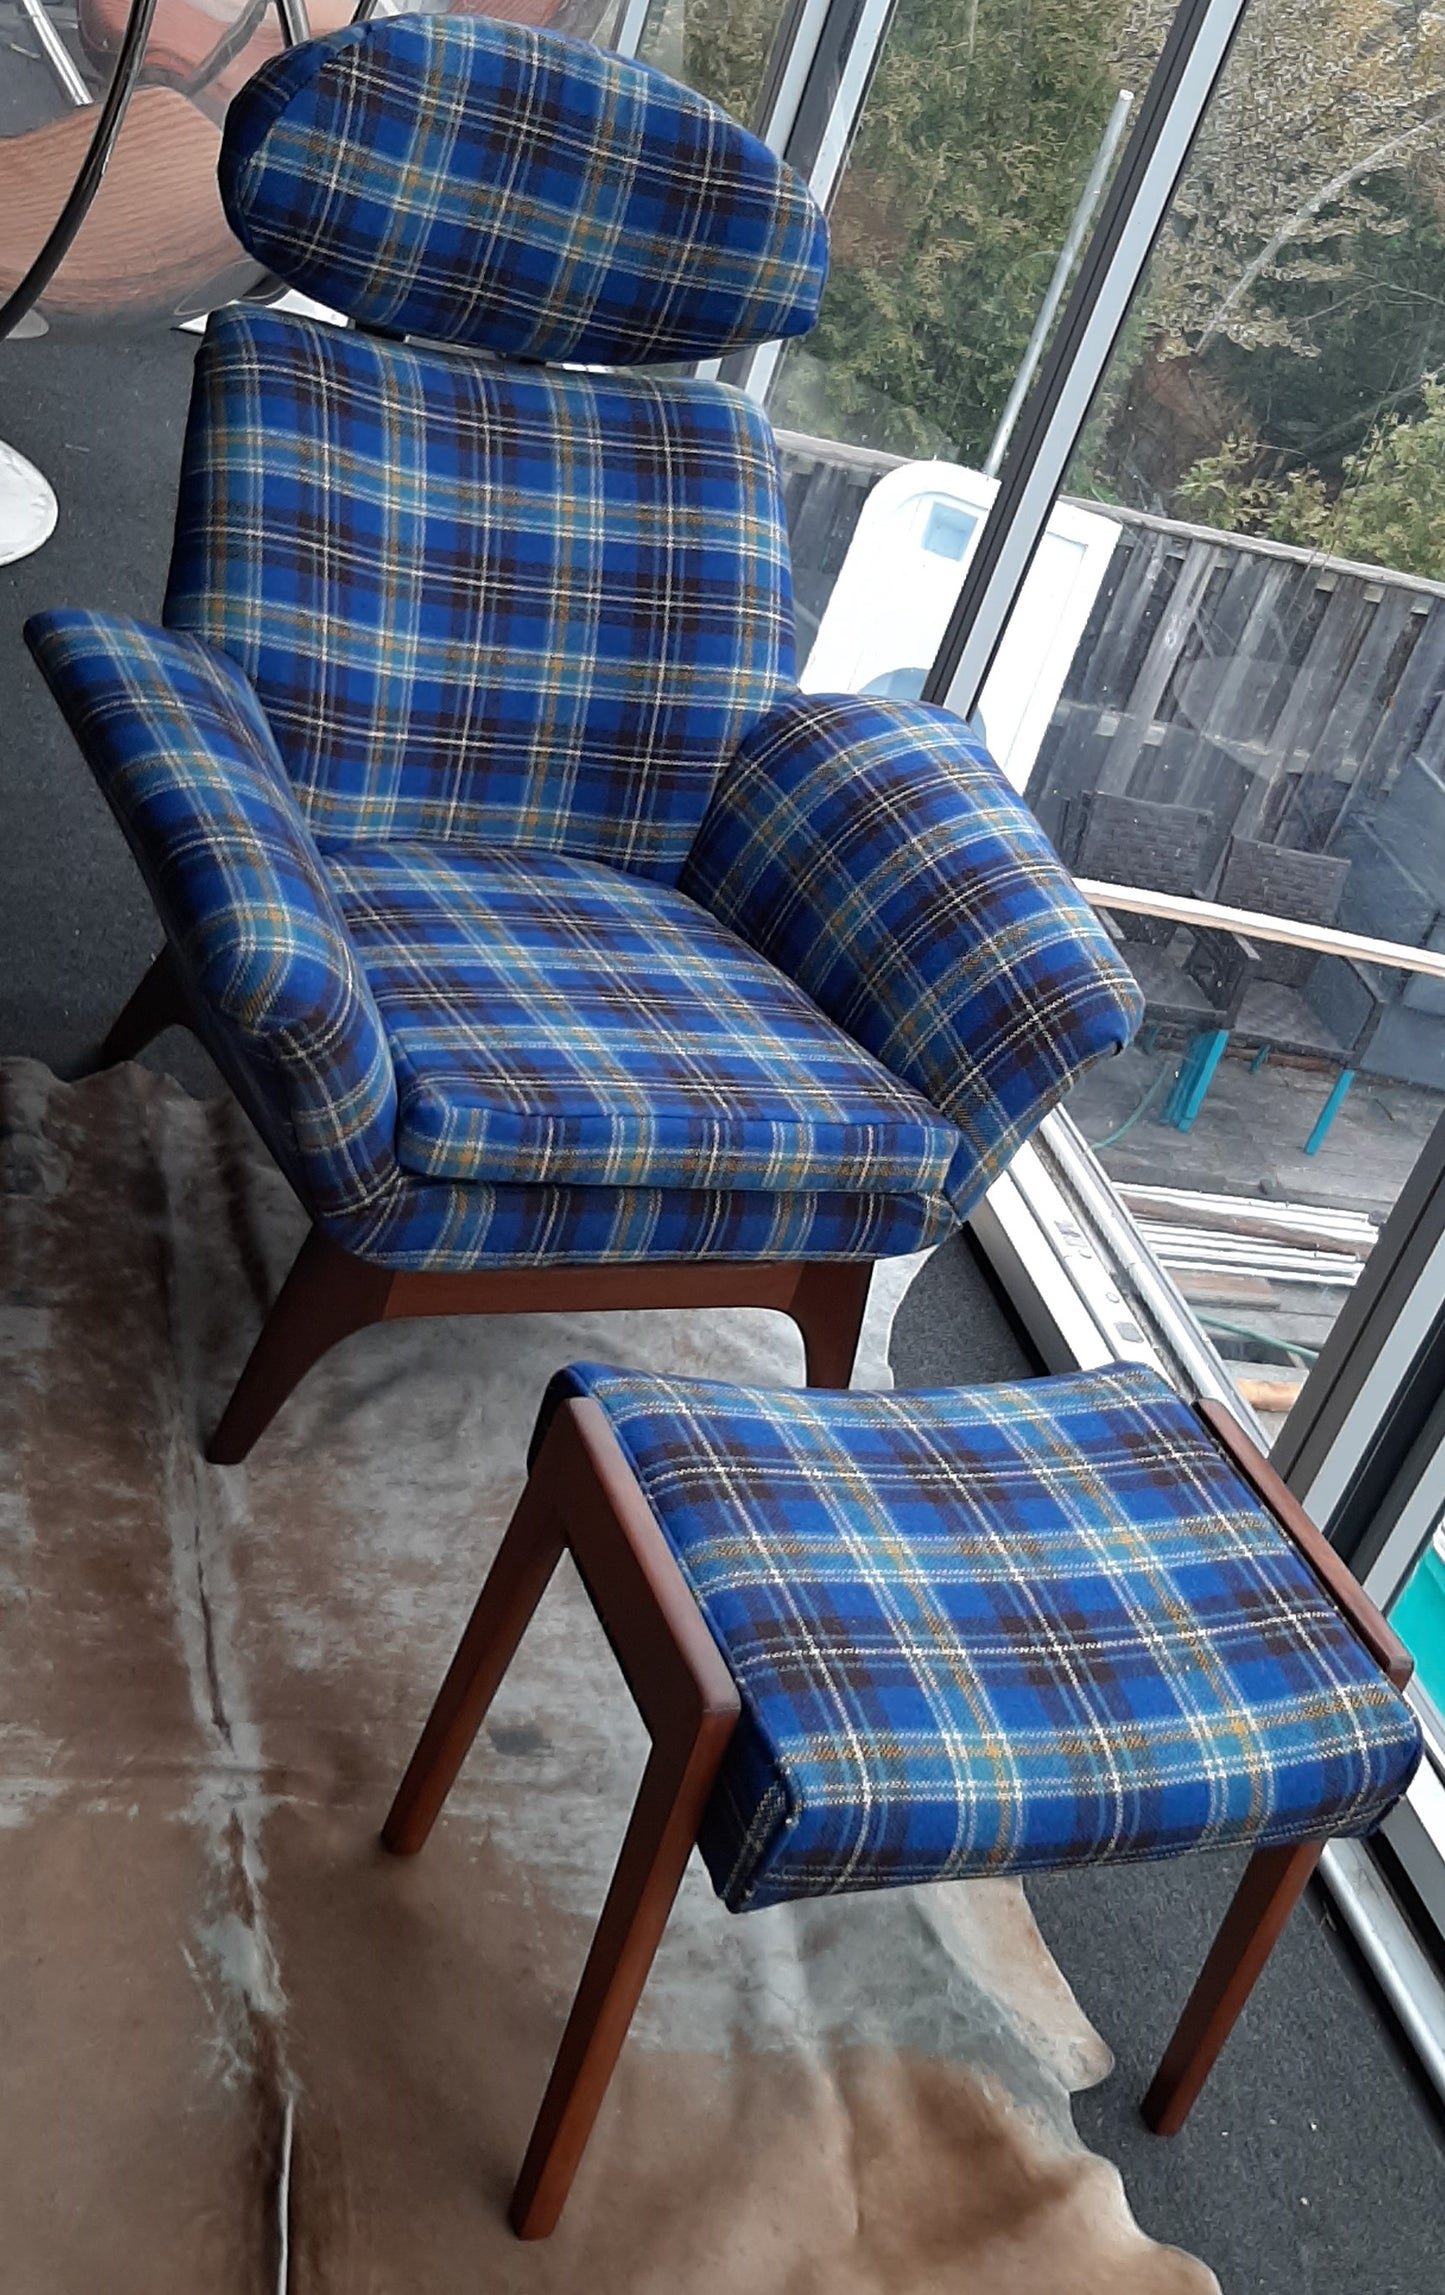 REFINISHED REUPHOLSTERED Adrian Pearsall style Teak  Lounge Chair and ottoman in Maharam plaid wool PERFECT - Mid Century Modern Toronto